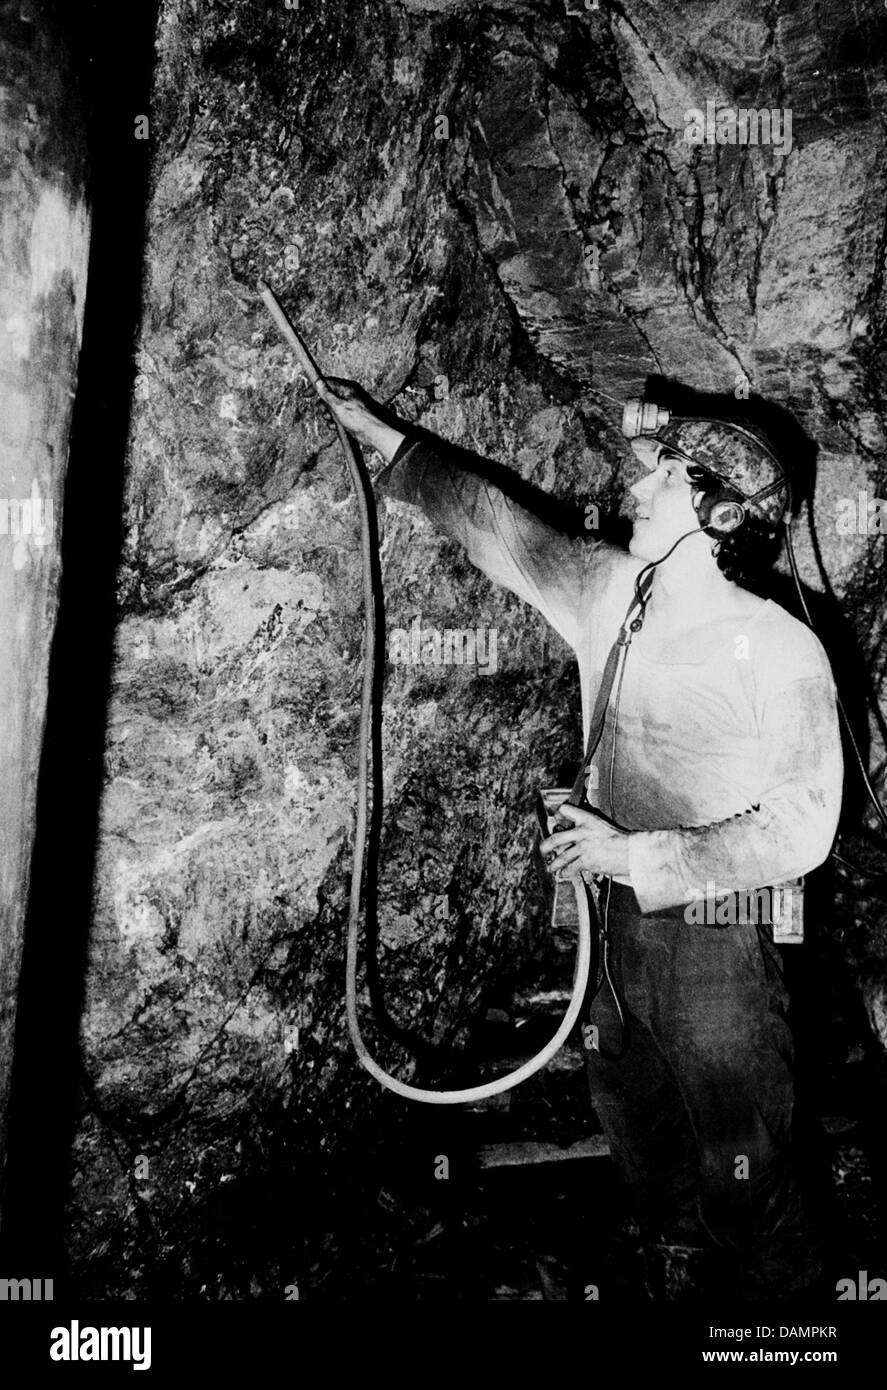 (FILE) An archive photo dated 1985 shows a man checking the rocks of a shaft in the Wismut uranium mine with a Geiger counter near Aue, Germany. It has now been scientifically proven that with the discovery of uranium in the ore mountains of Thuringia, Germany, the Soviet Union rose once as a nuclear superpower. A study looks at the long secret history of East Germany uranium minin Stock Photo